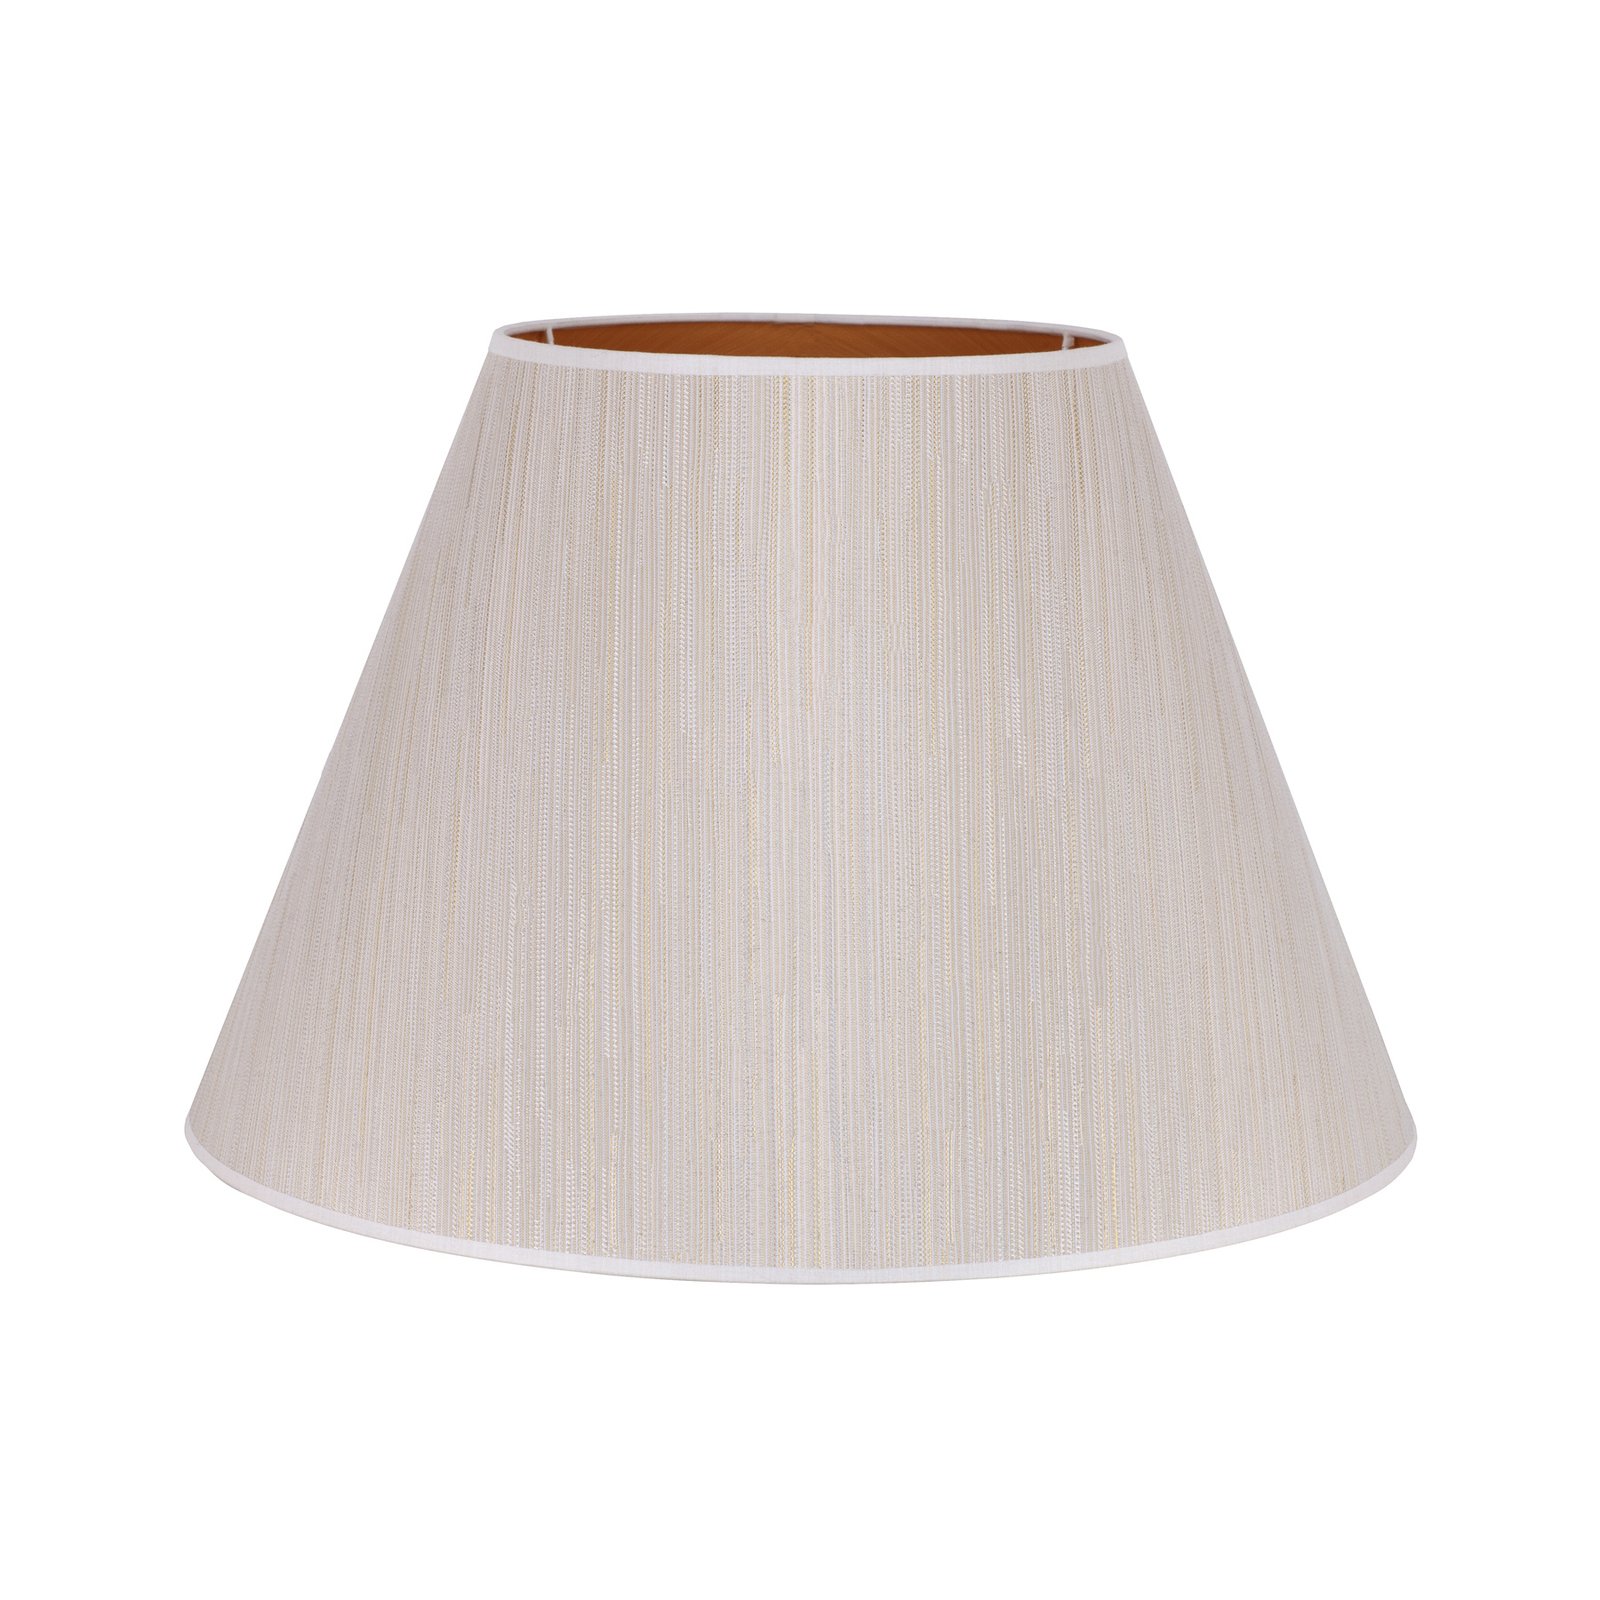 Sofia lampshade height 31 cm, white/gold streaks